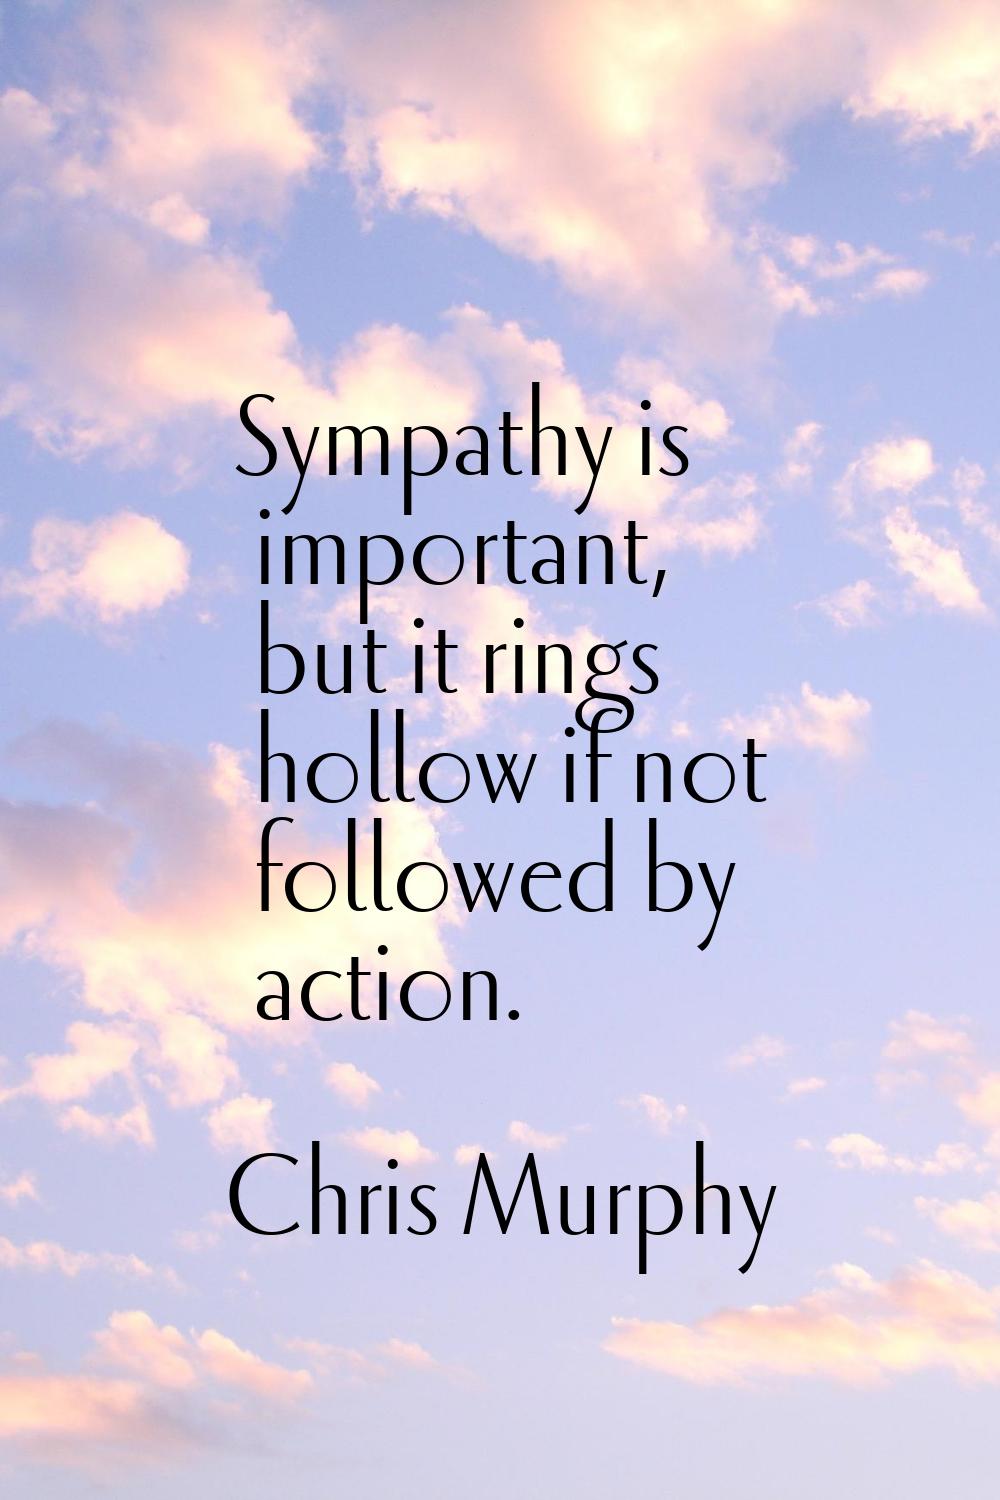 Sympathy is important, but it rings hollow if not followed by action.